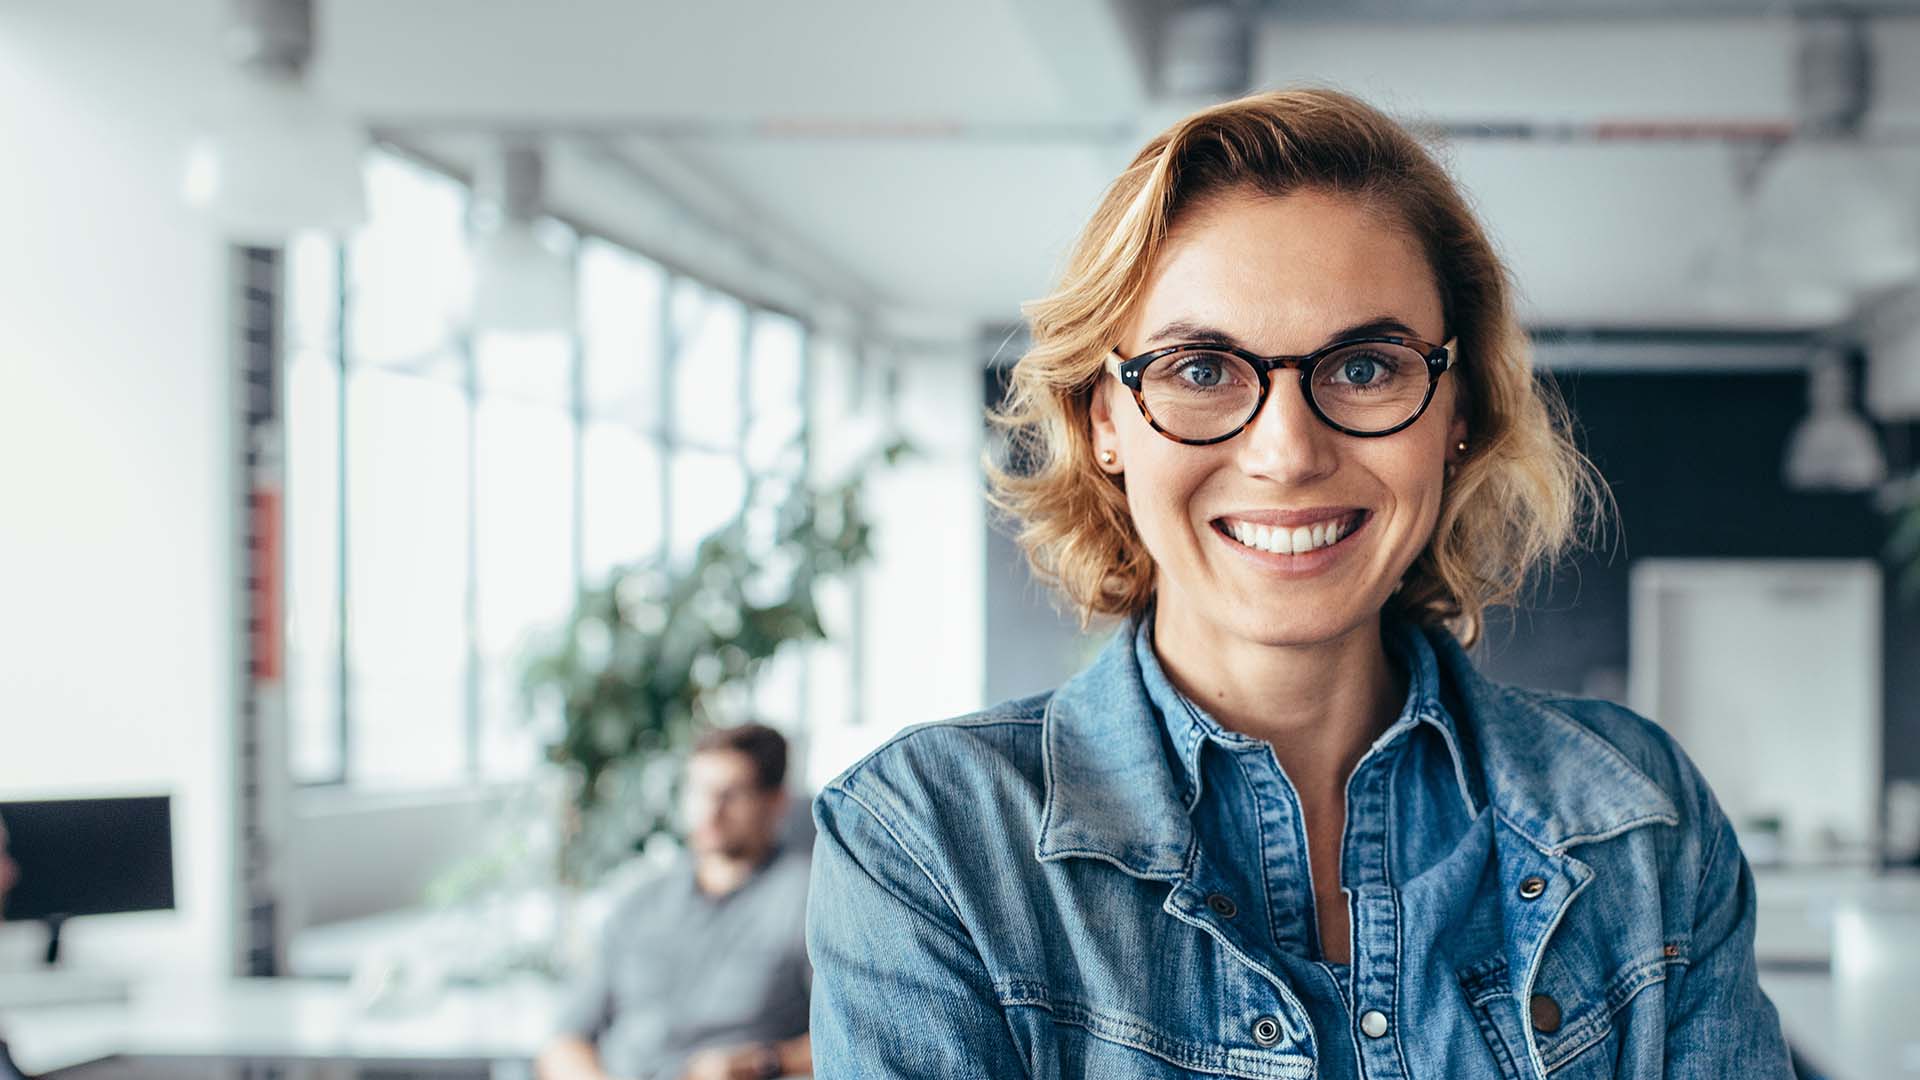 A smiling woman with glasses in an office